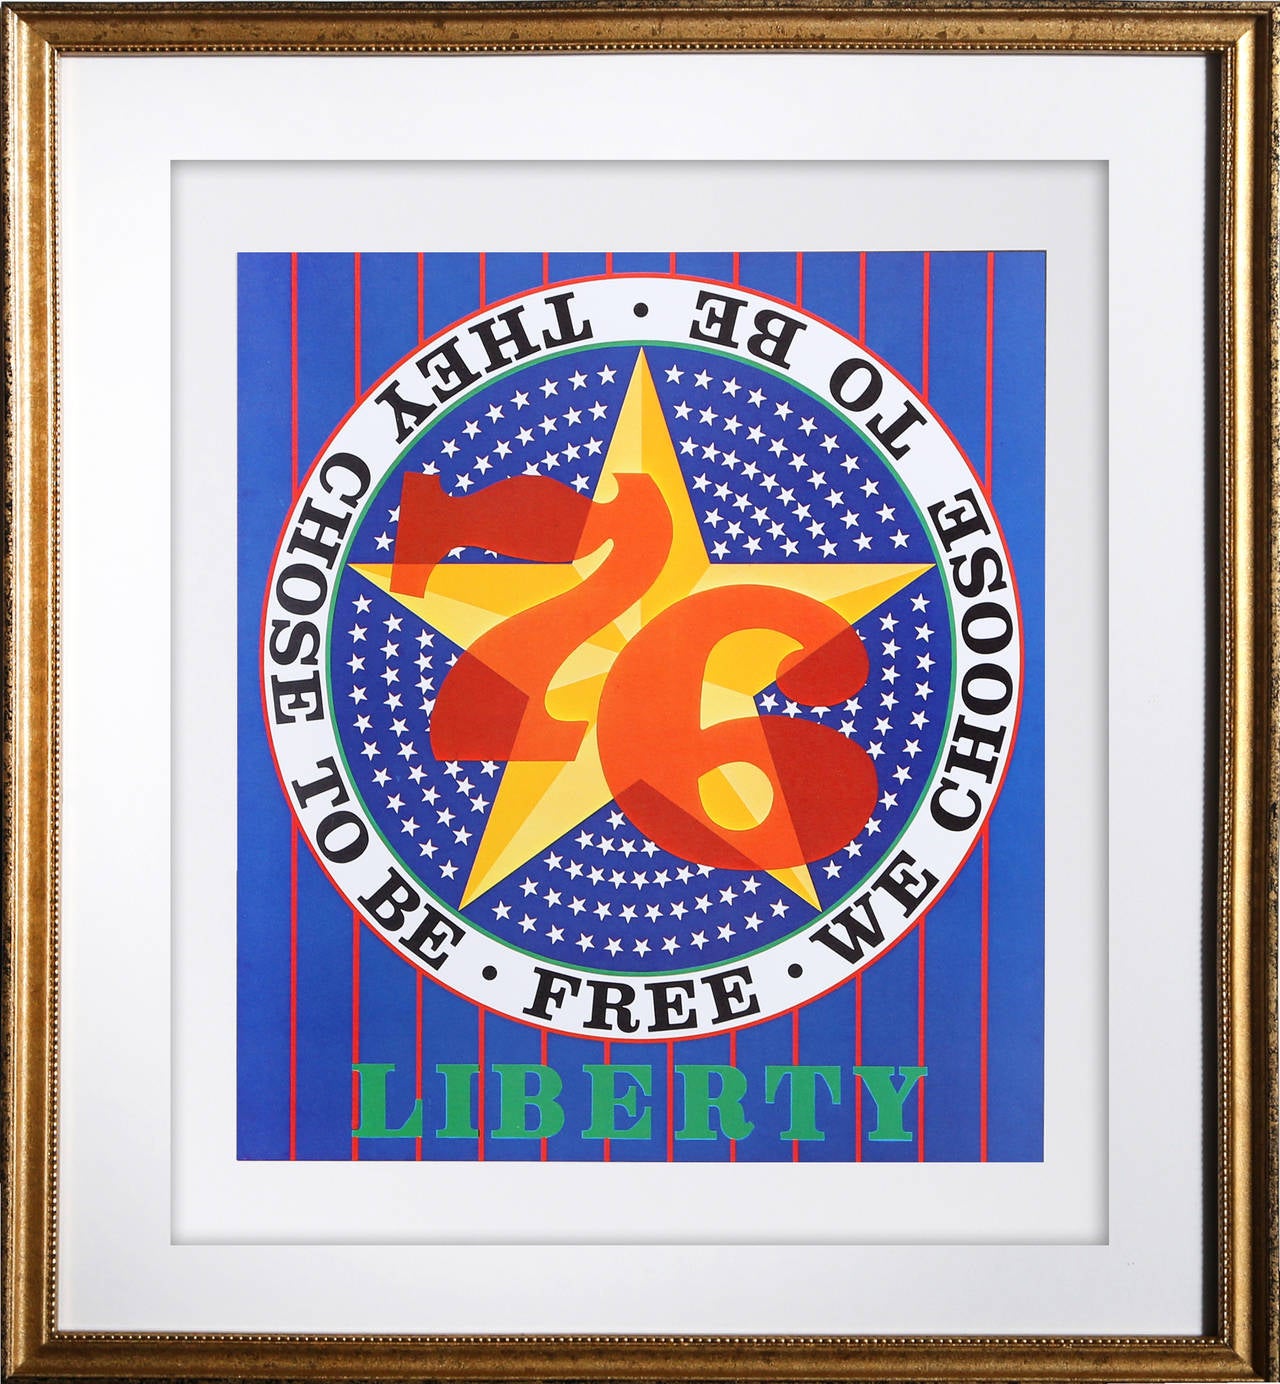 Artist:	after Robert Indiana
Title:	Liberty from Kent-Bicentennial Portfolio Spirit of Independence
Year: 1975
Medium:	Offset Lithograph (unsigned)
Paper Size: 17 x 14 inches
Frame: 19 x 18 inches

An original fine art print from the Spirit of